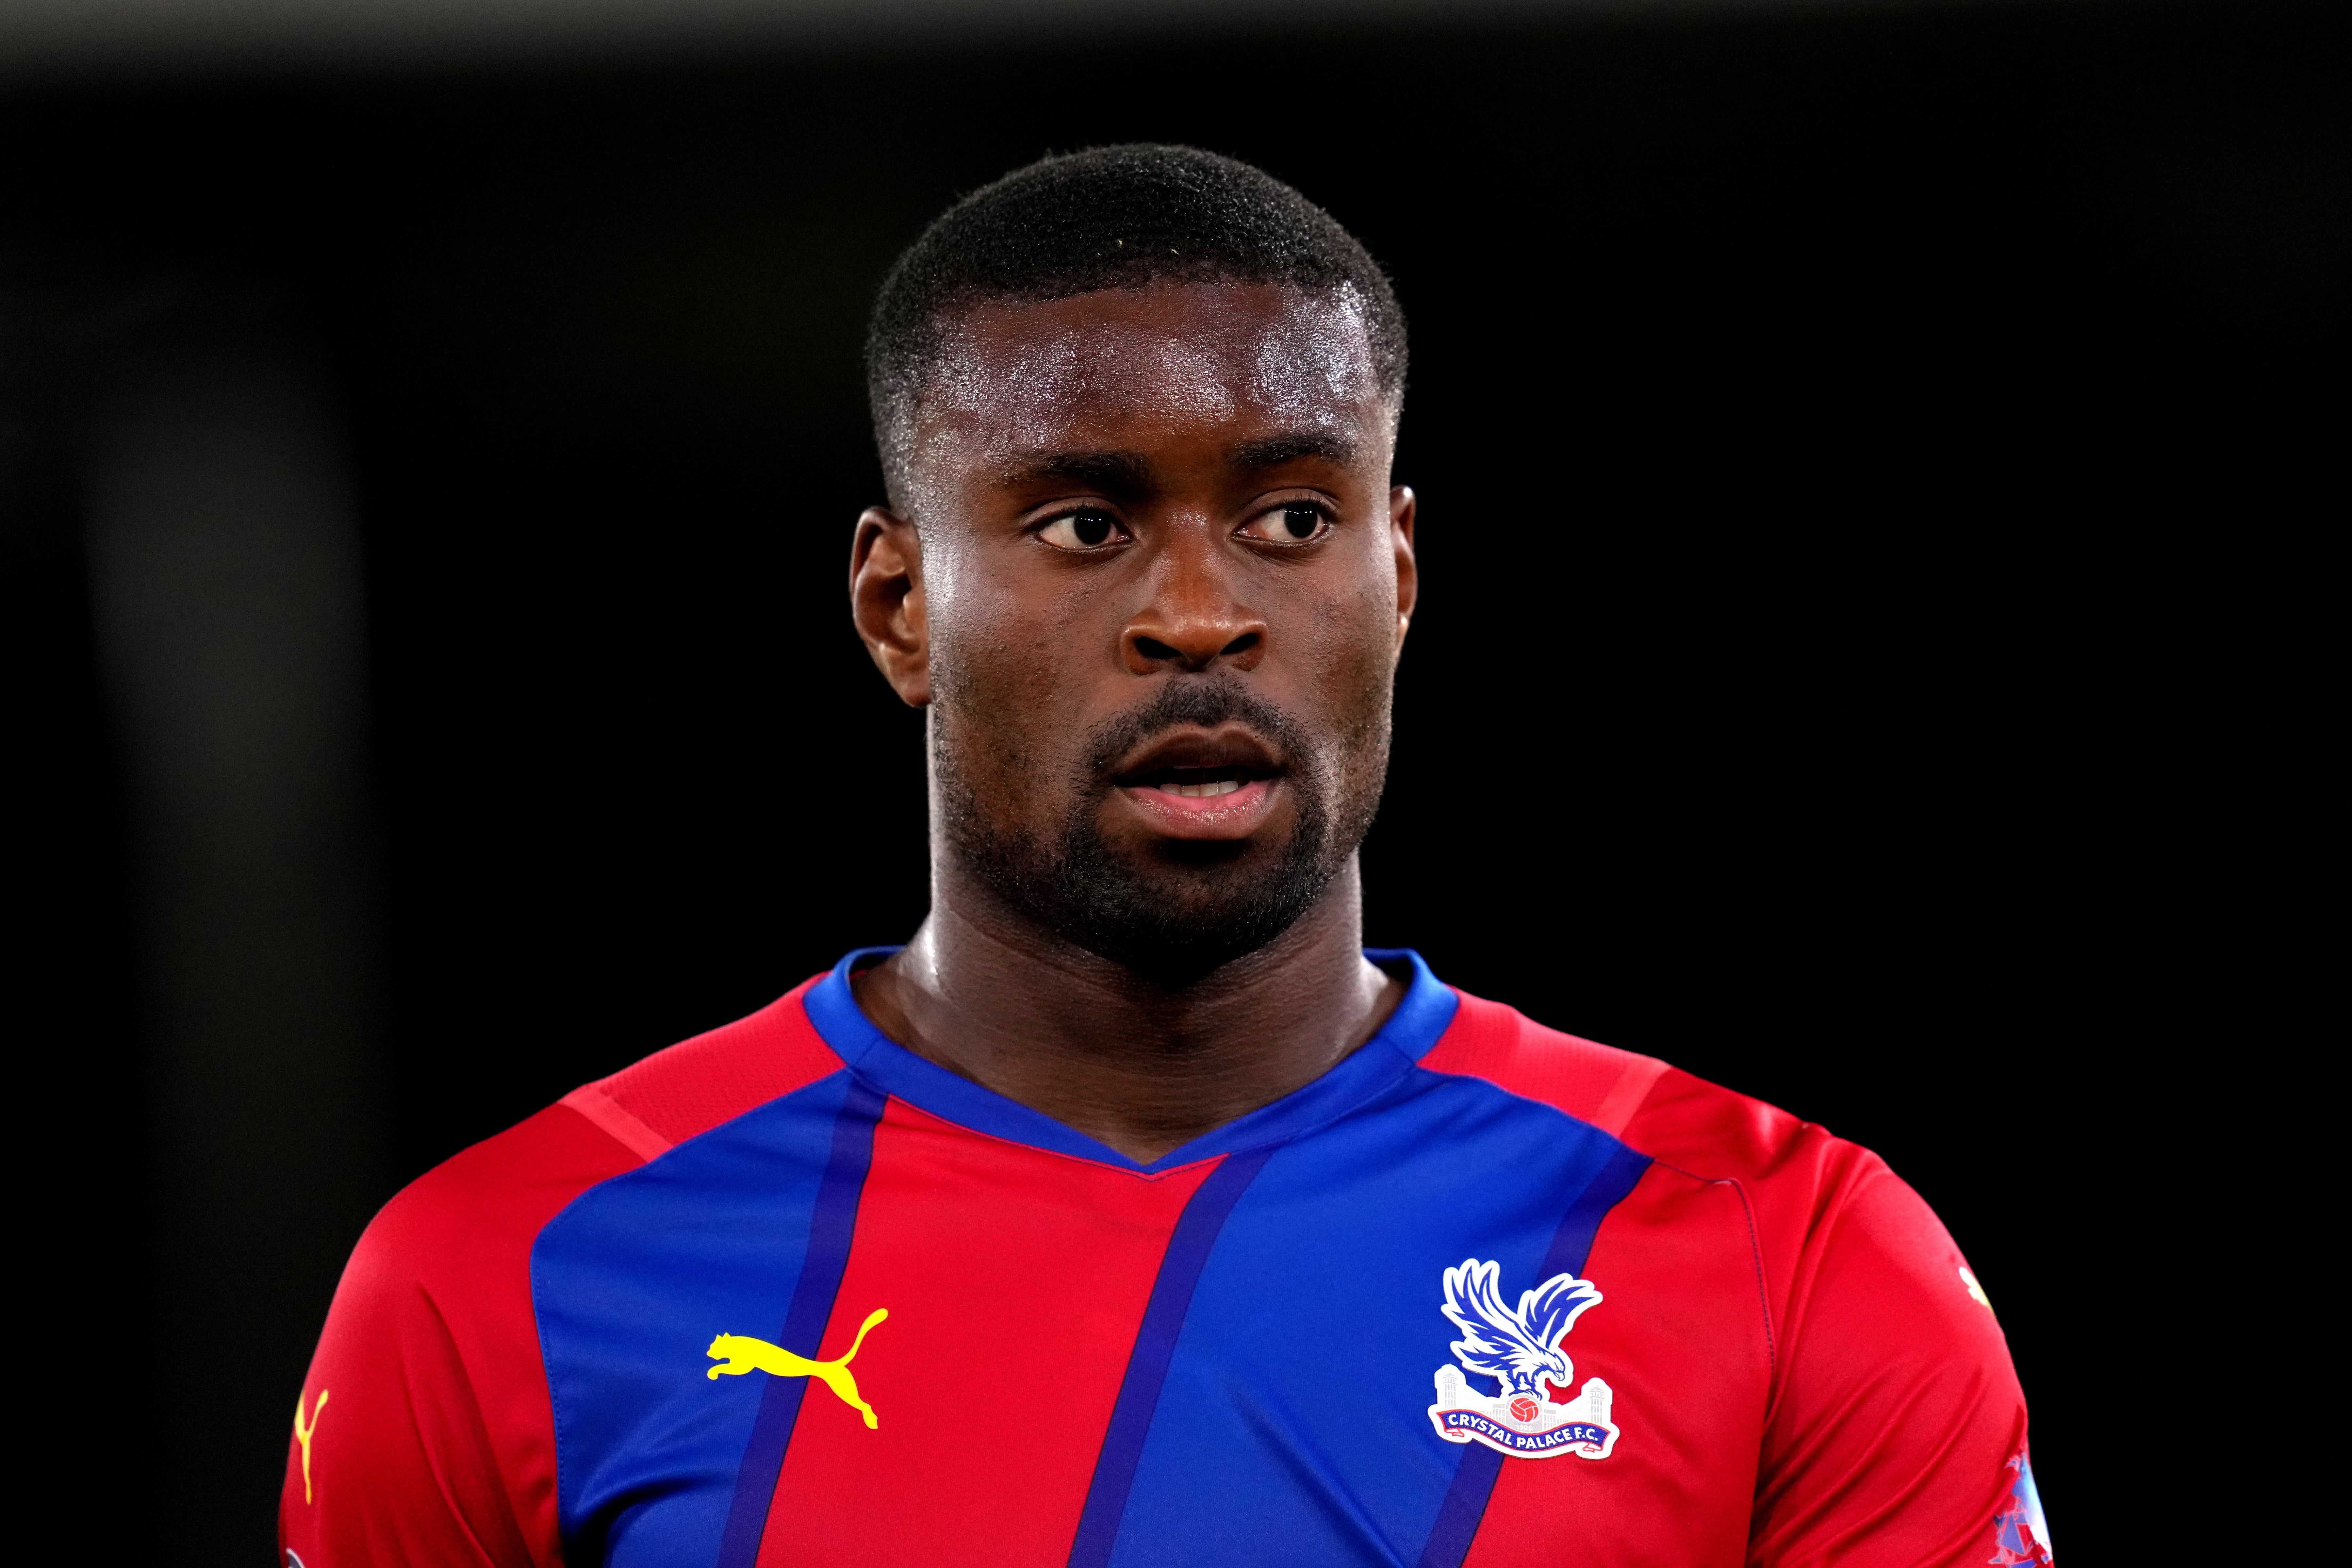 Crystal Palace defender Marc Guehi has been tipped to play for England by Patrick Vieira (John Walton/PA)